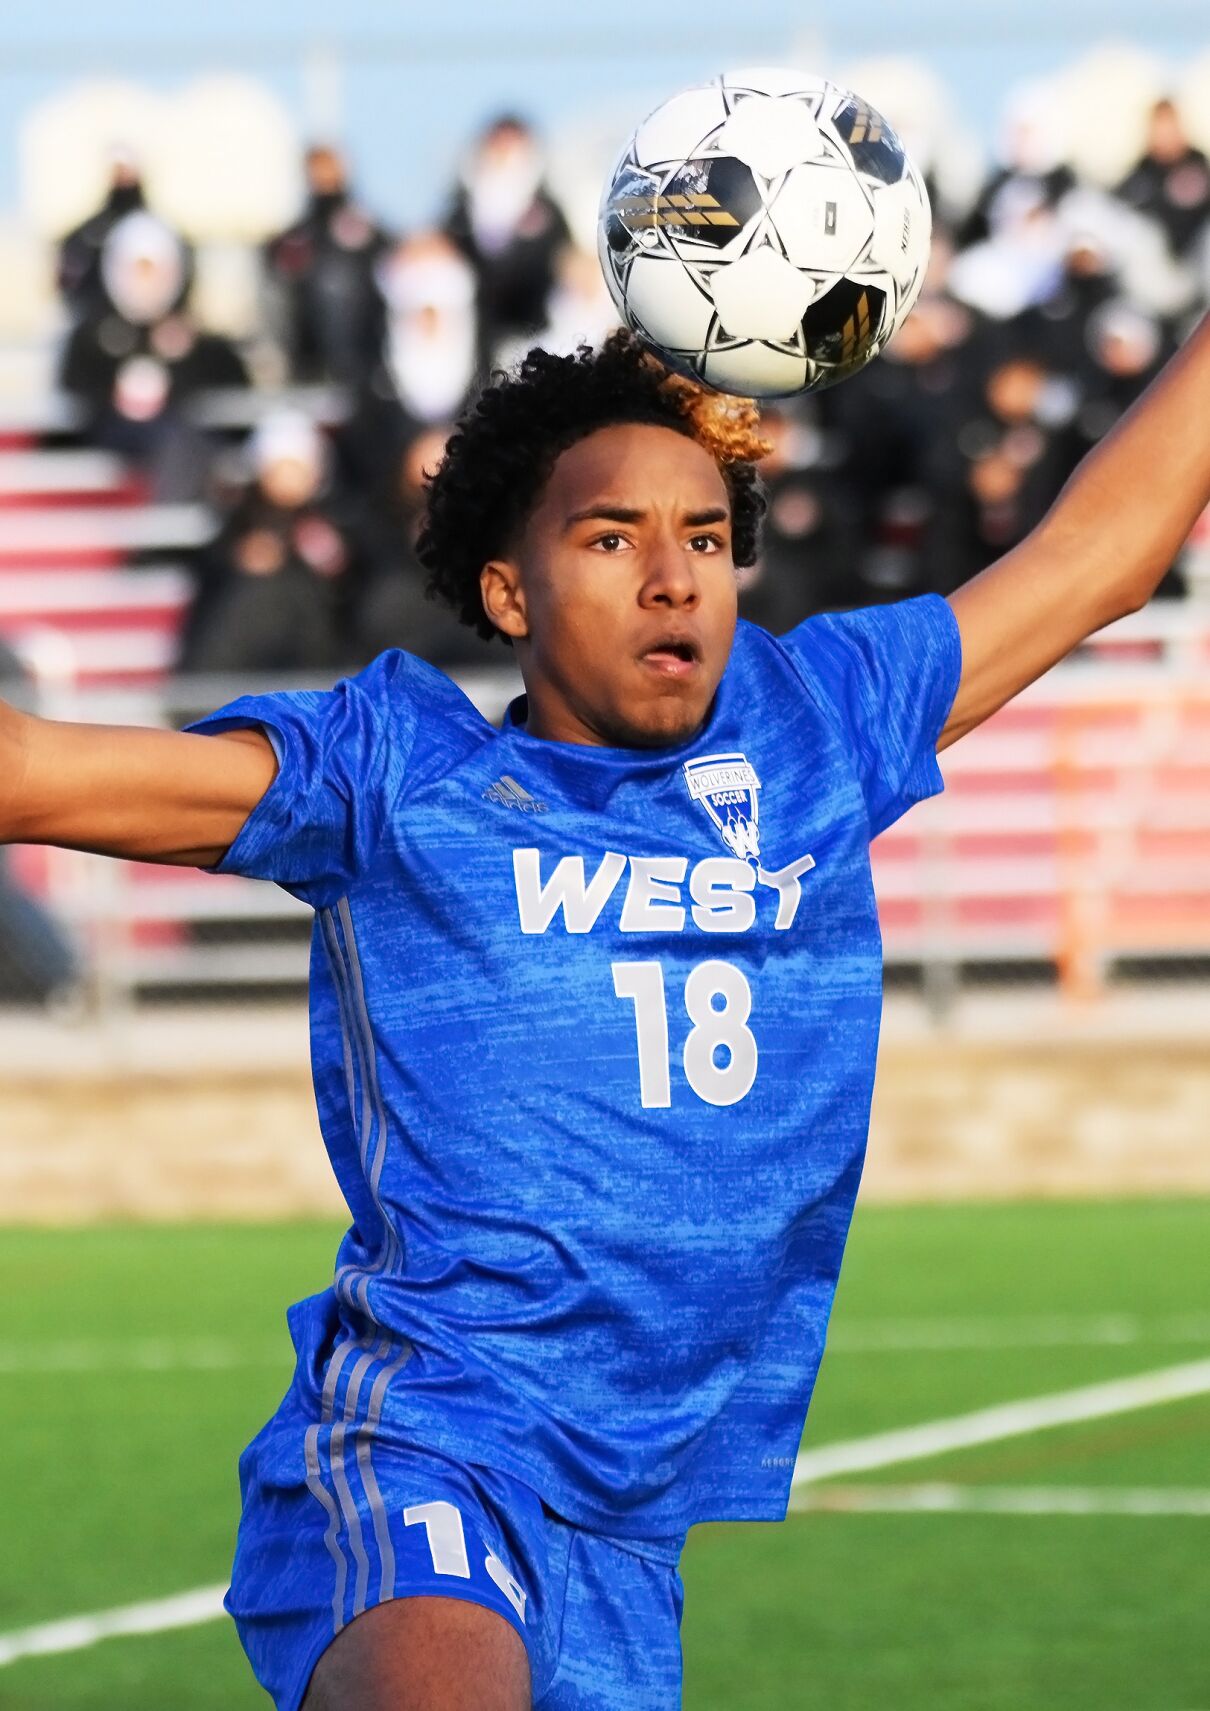 Waukesha West Boys Soccer Team Faces Heartbreaking Loss in State Semifinal Match